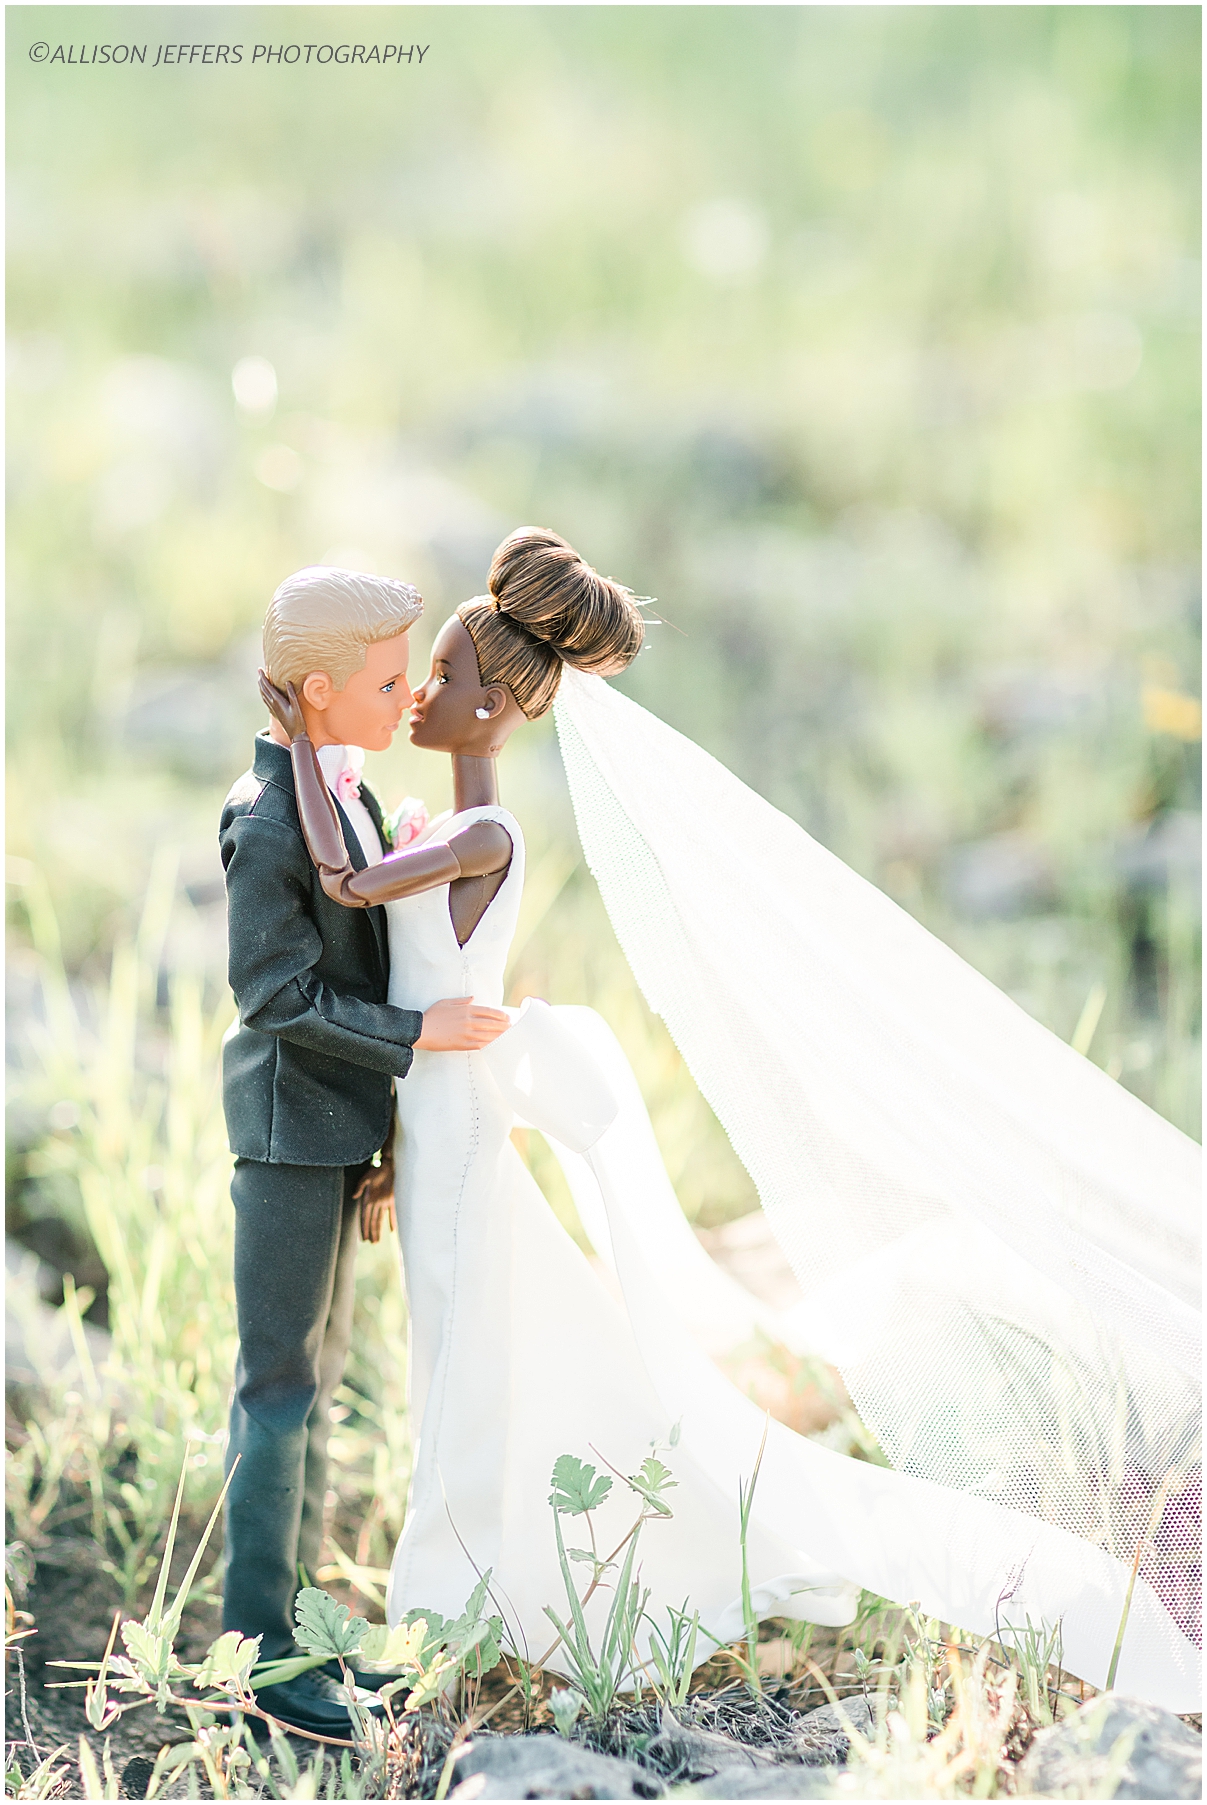 Barbie and Ken dream wedding photography styled shoot by Allison Jeffers Photography 0034